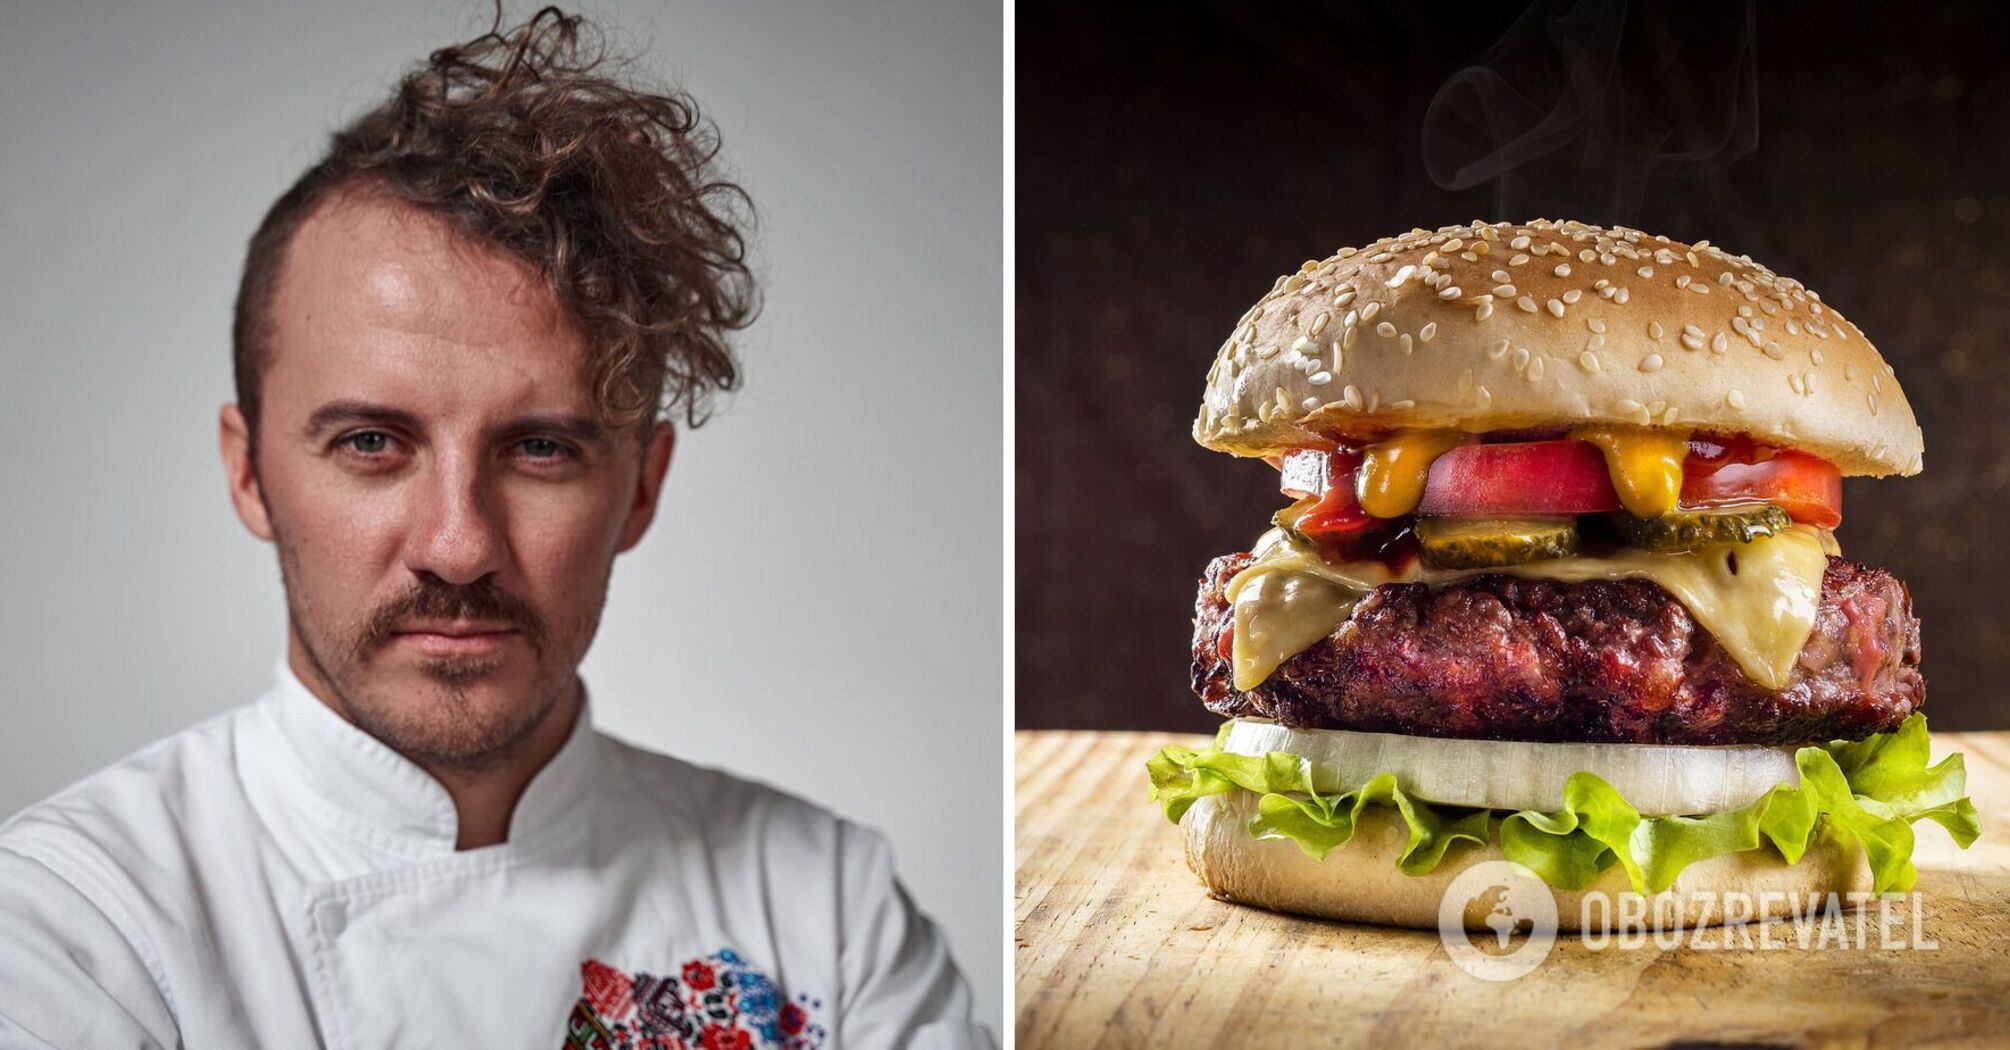 Yevhen Klopotenko tells how to cook burgers deliciously at home